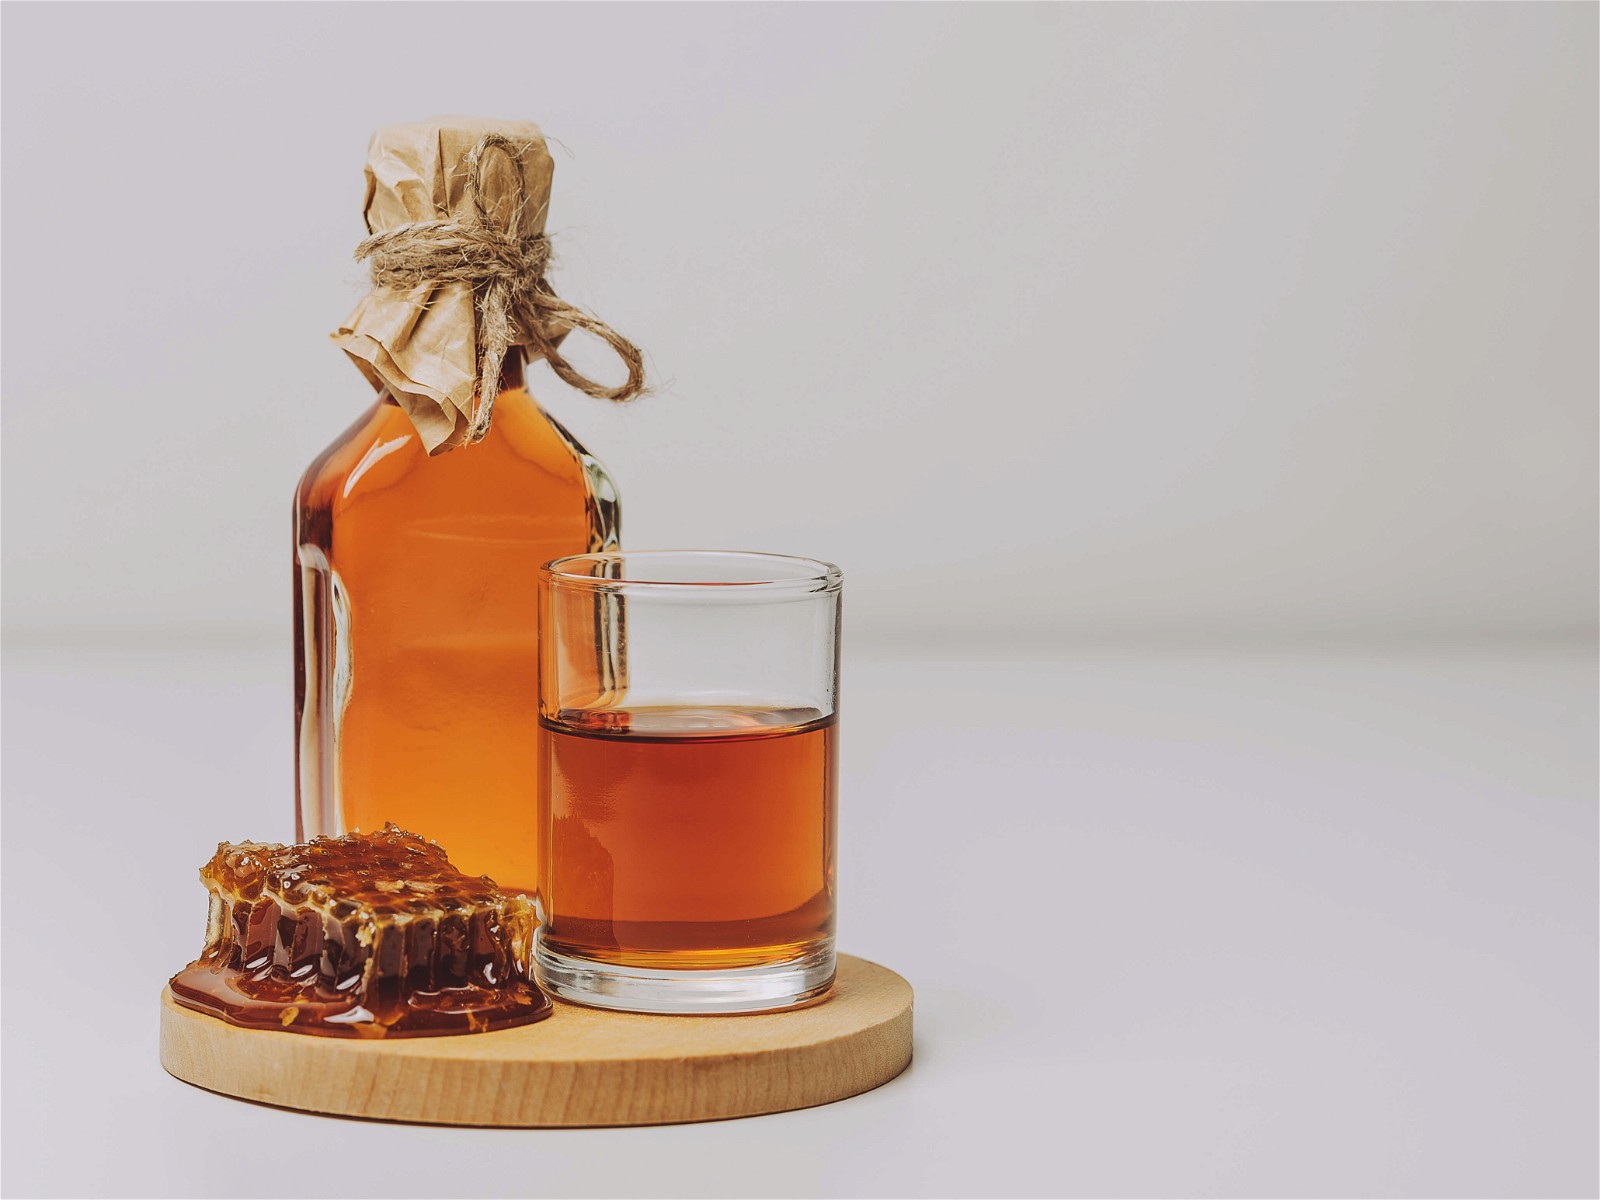 Honey, water, nutrients & yeast. Our Mead Making Kit will help you cra